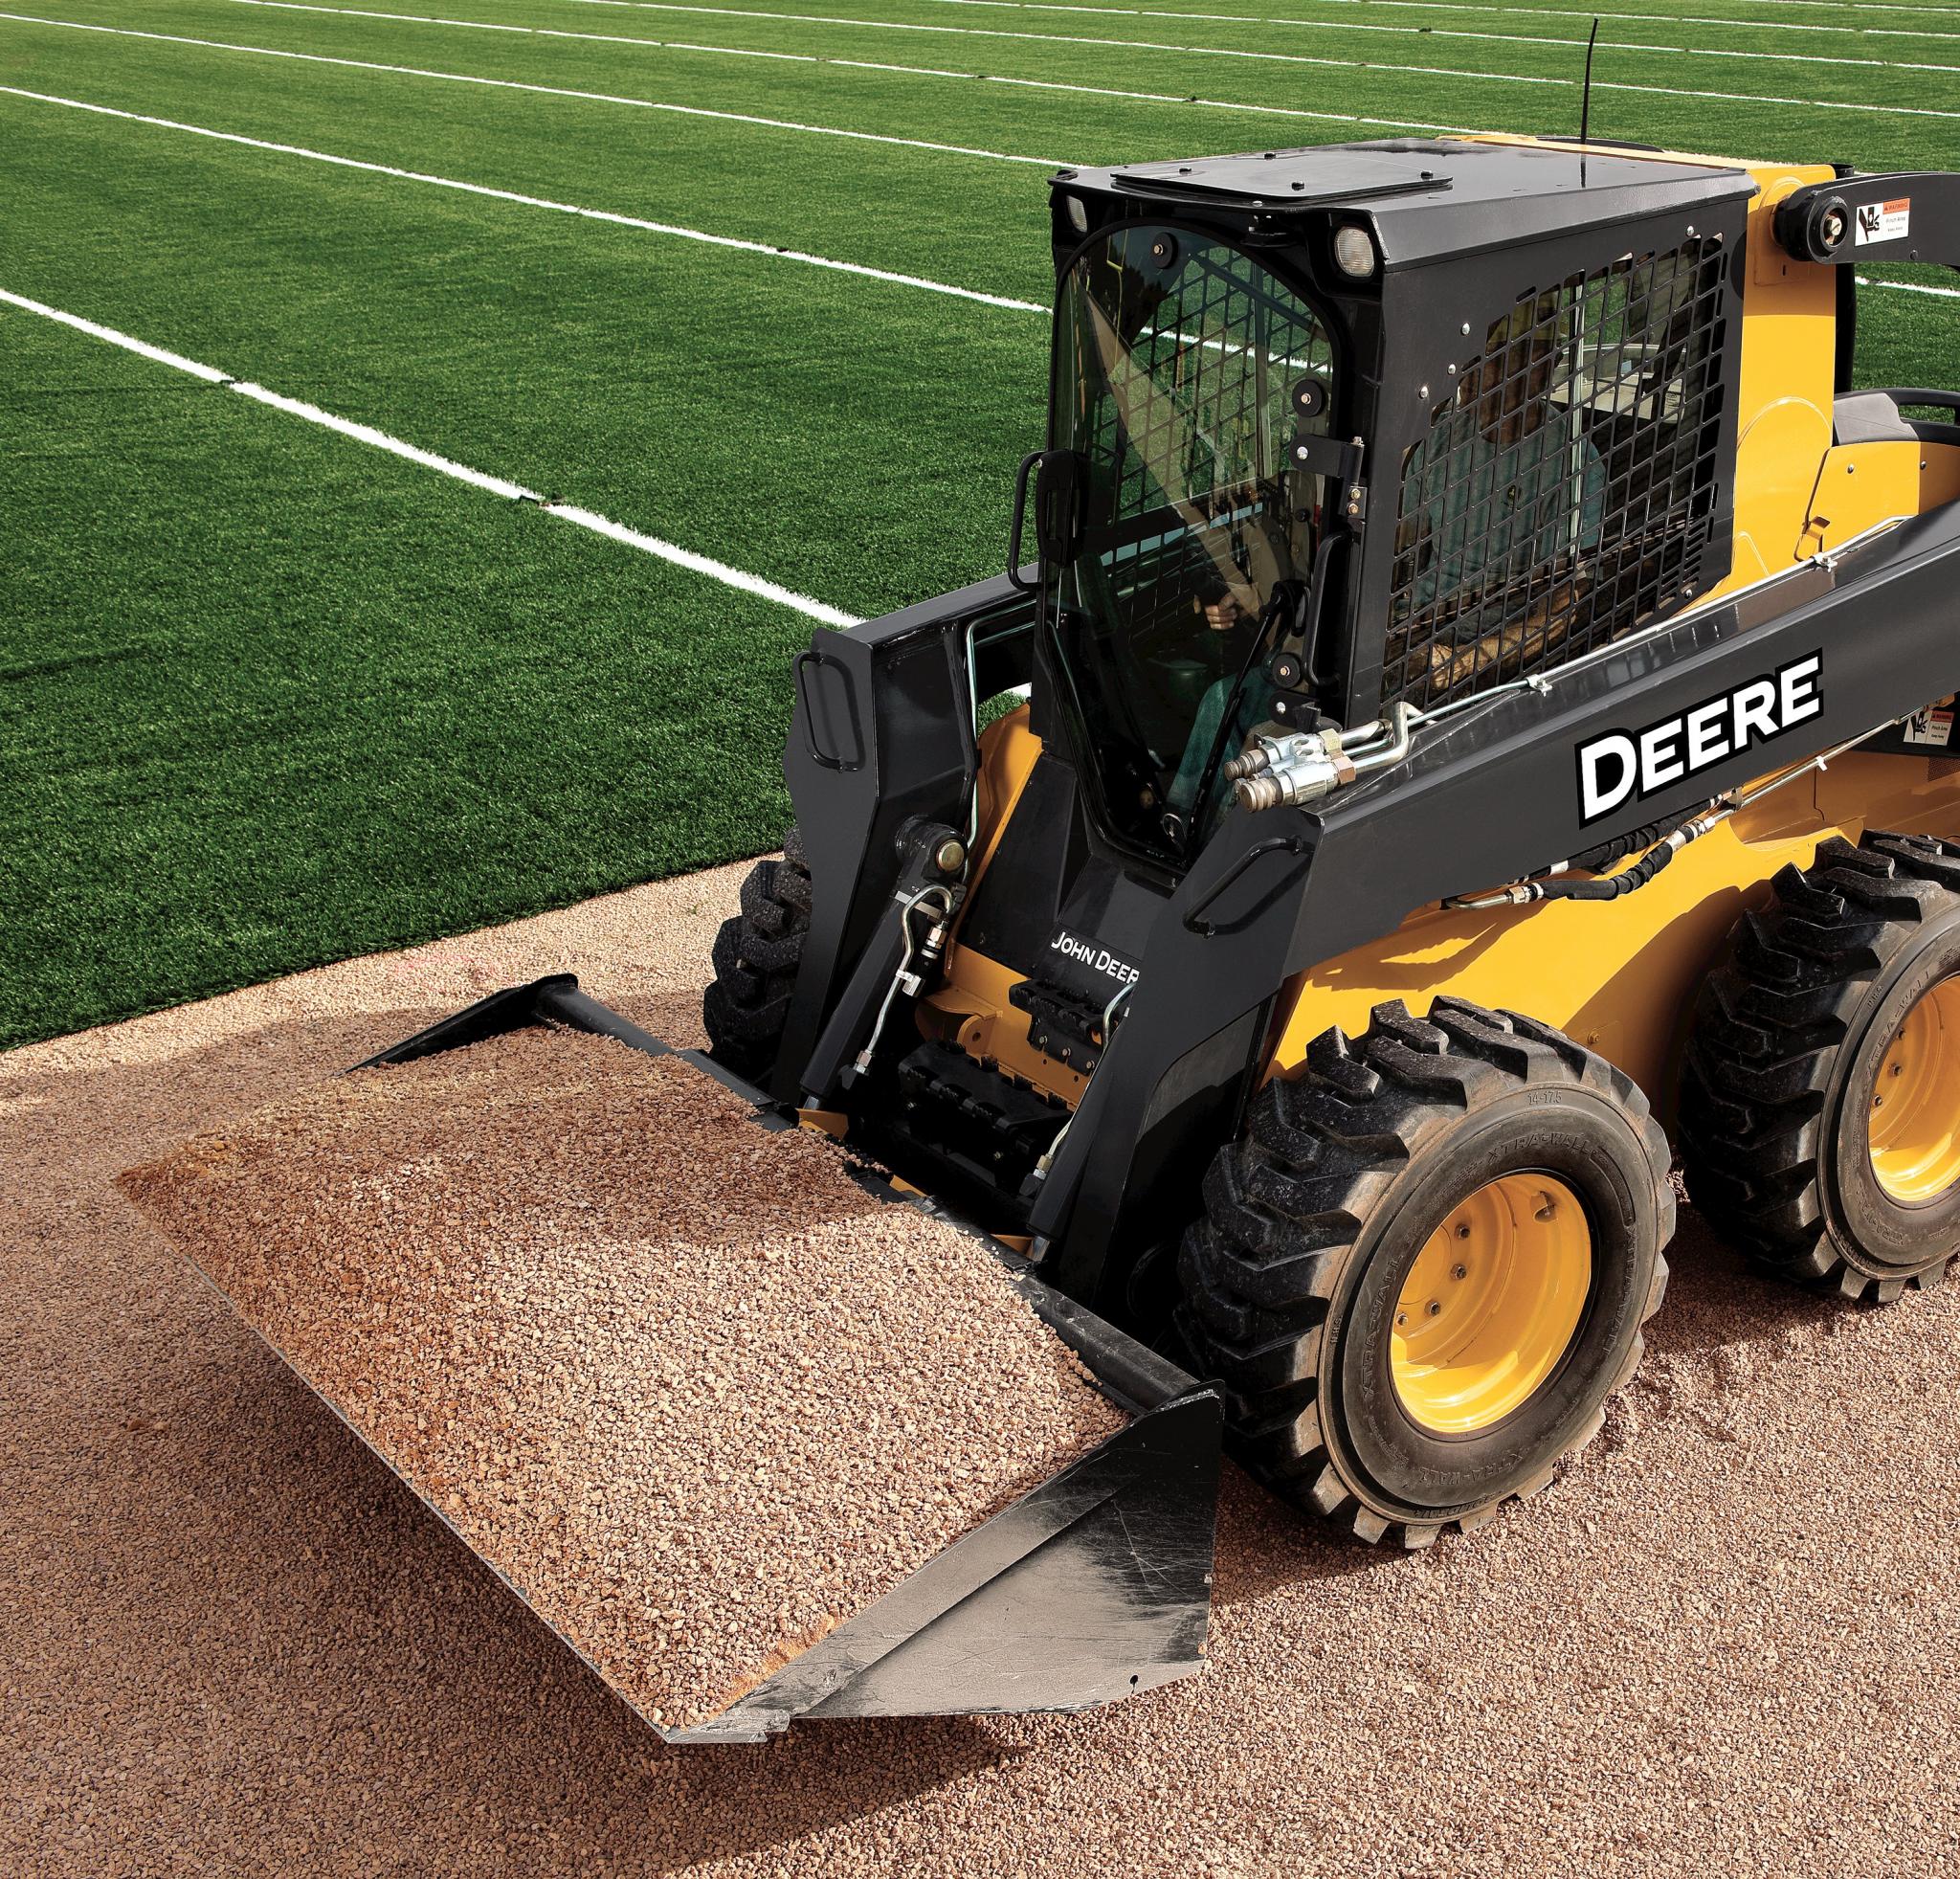 John Deere on Twitter: "Your schedule doesn't have any bye weeks. http